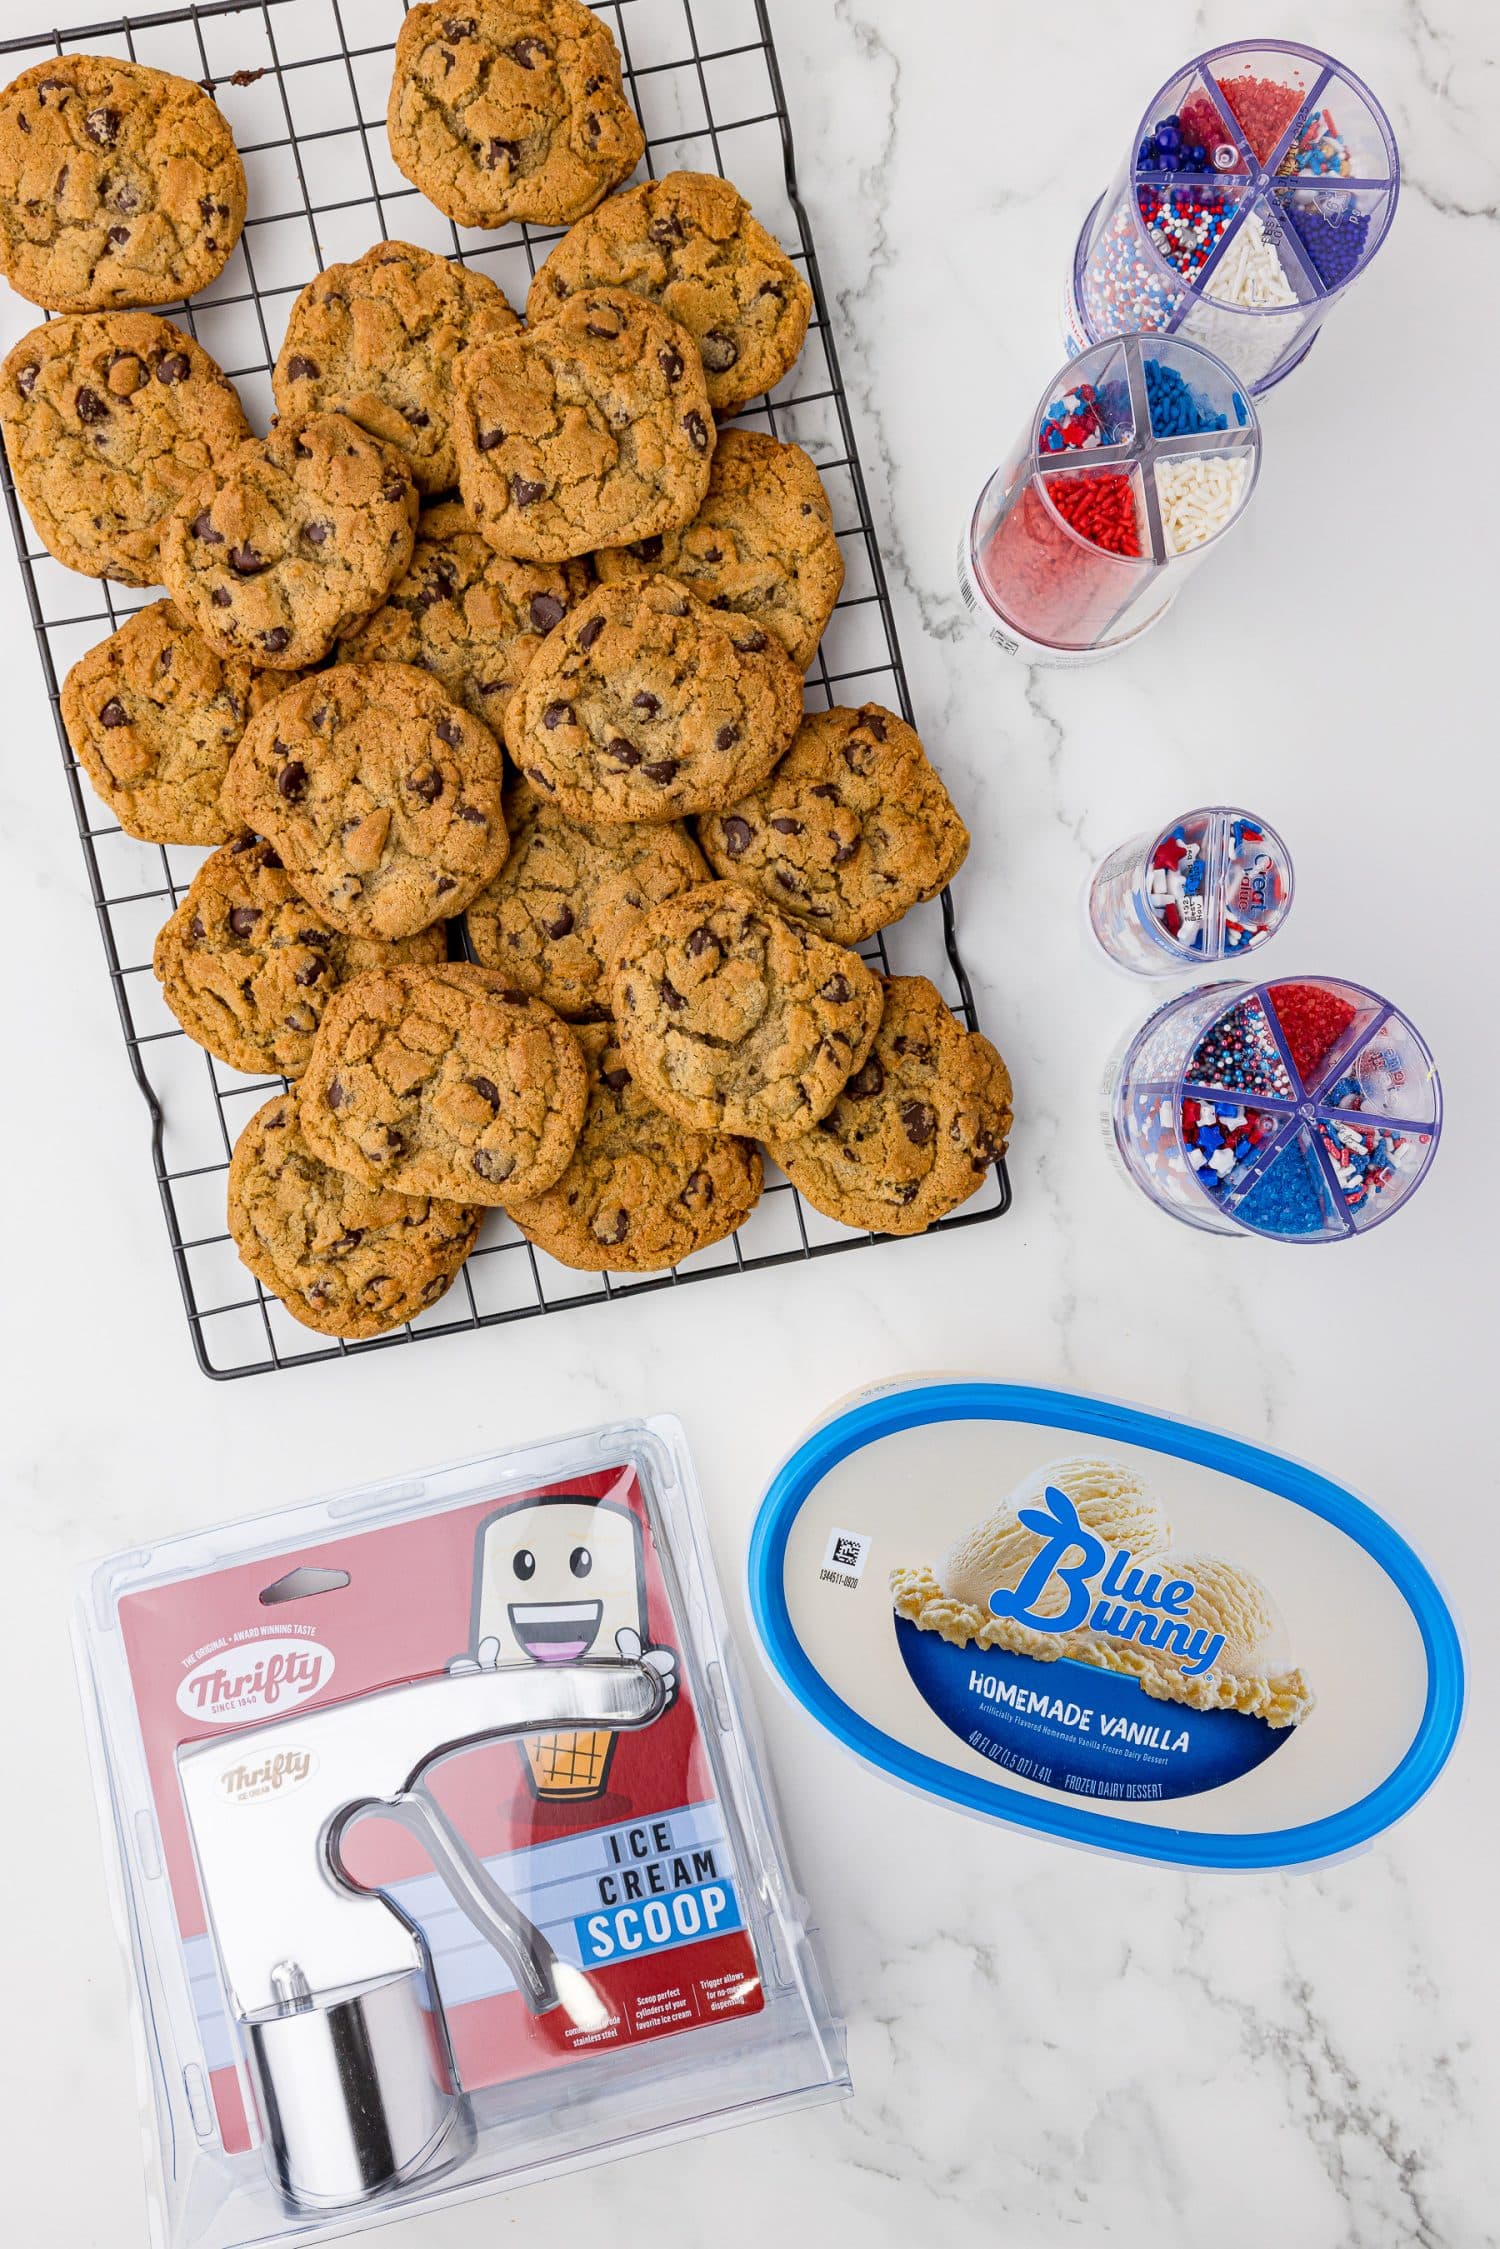 Ingredients for 4th of July ice cream sandwich cookies, including chocolate chip cookies, Blue Bunny vanilla ice cream, and sprinkles